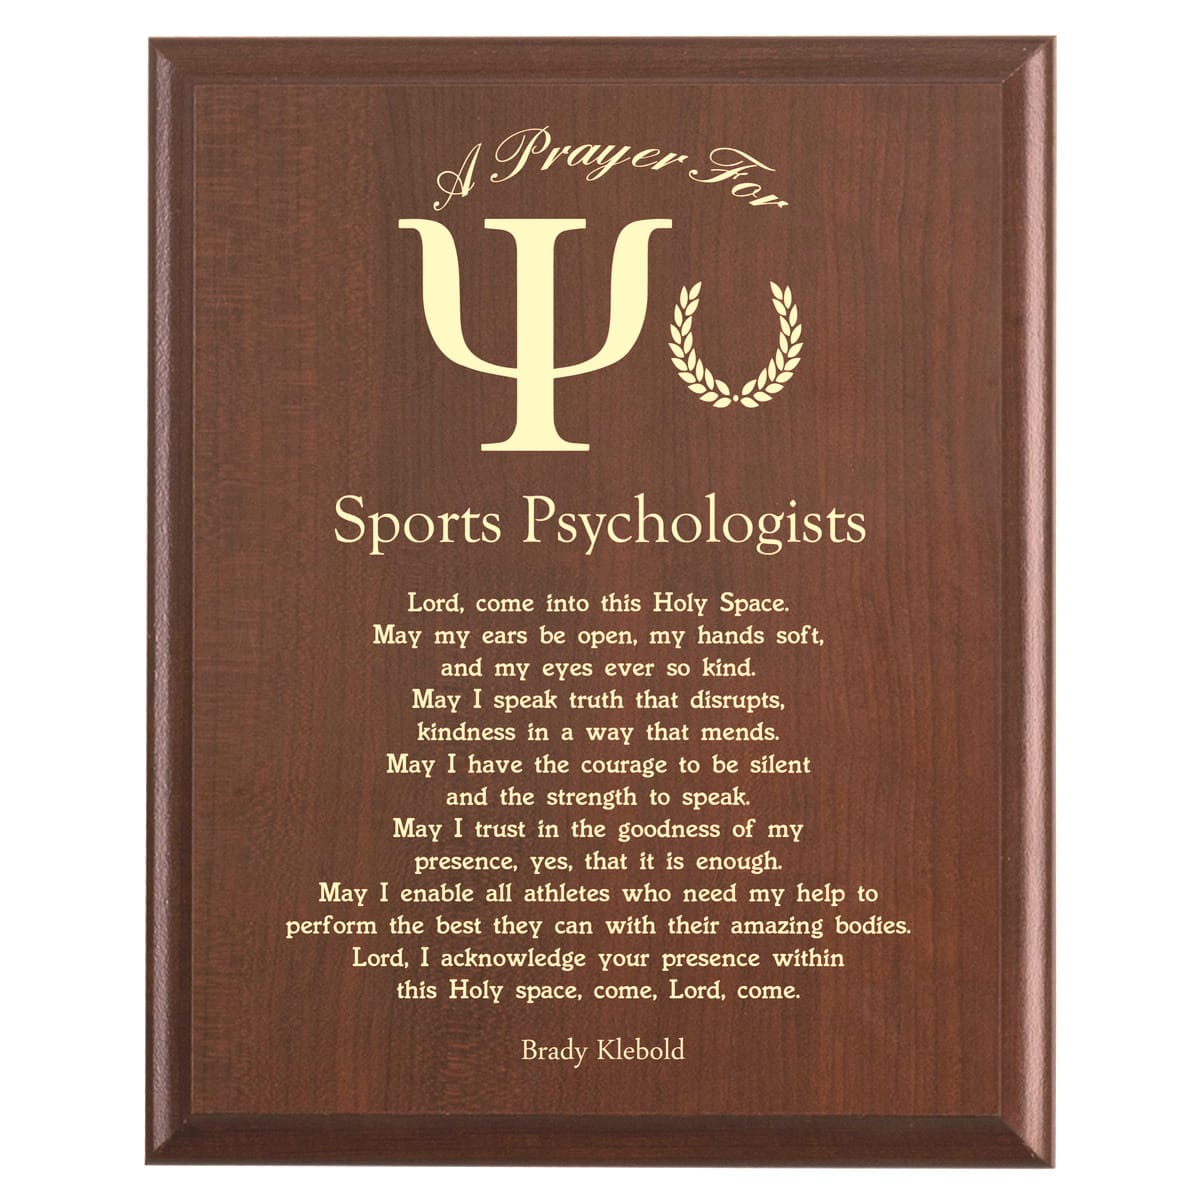 Plaque photo: Sports Psychologist Prayer Plaque design with free personalization. Wood style finish with customized text.